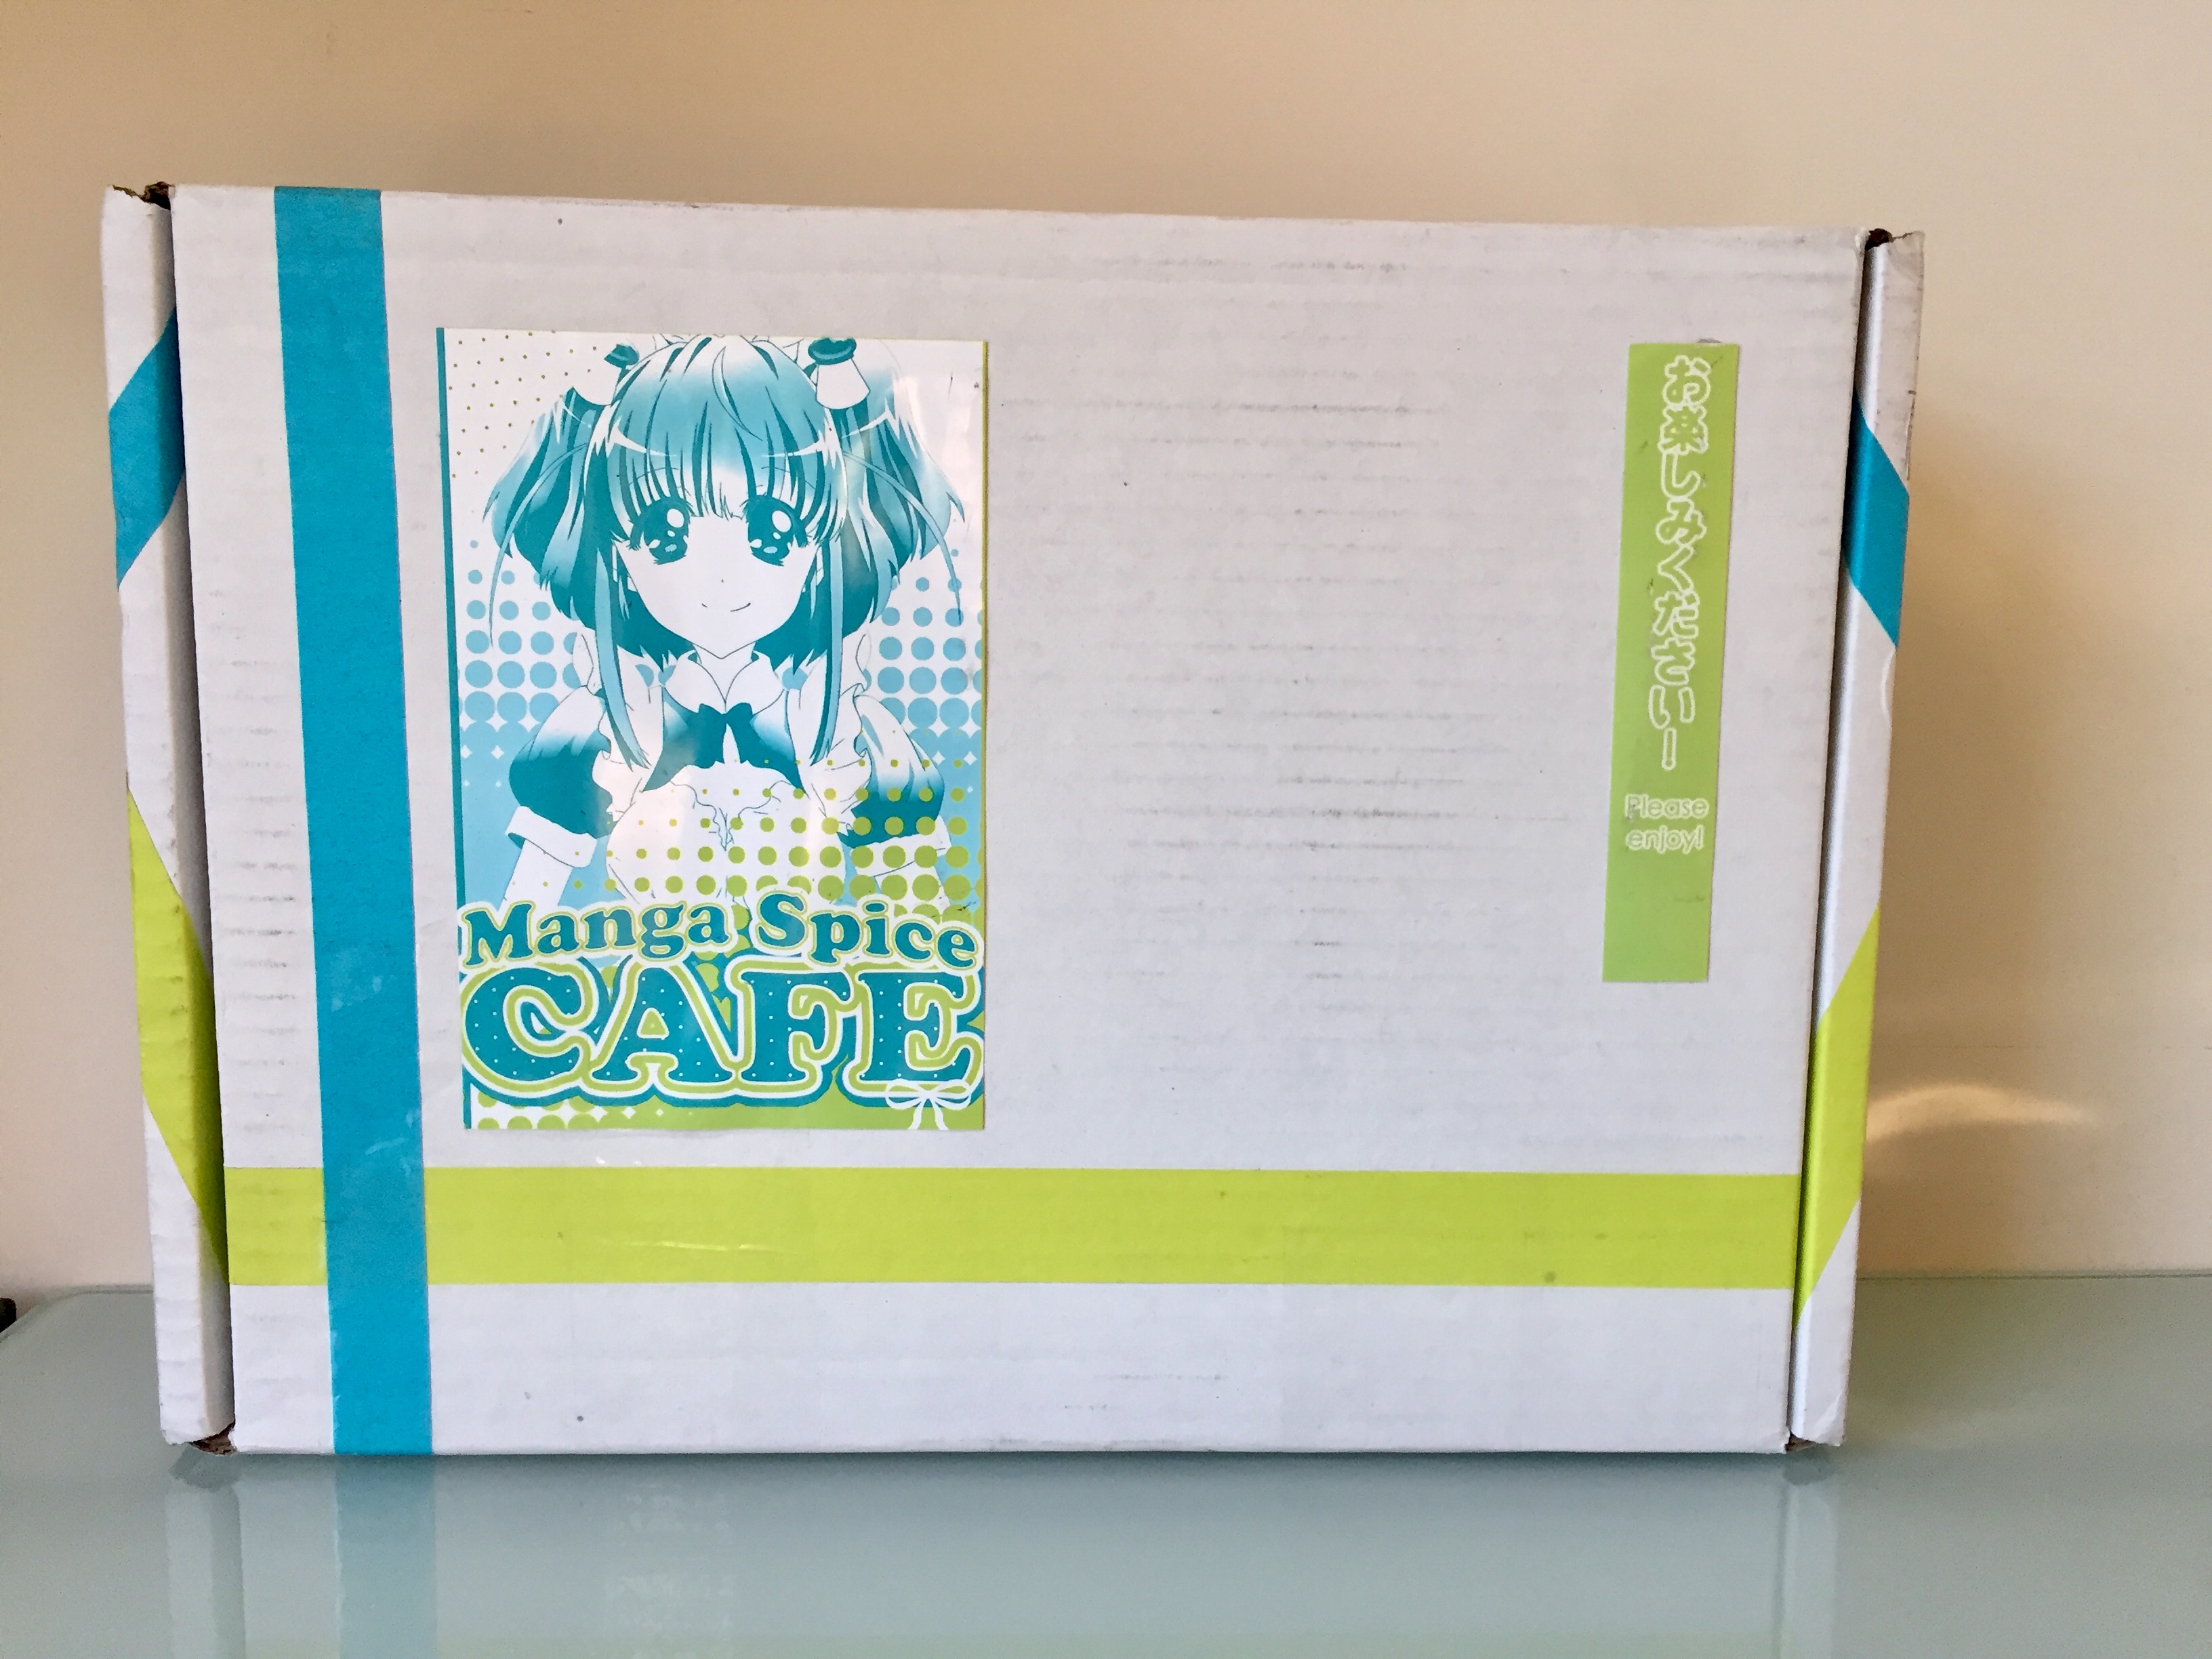 Manga Spice Cafe Subscription Review – September 2018